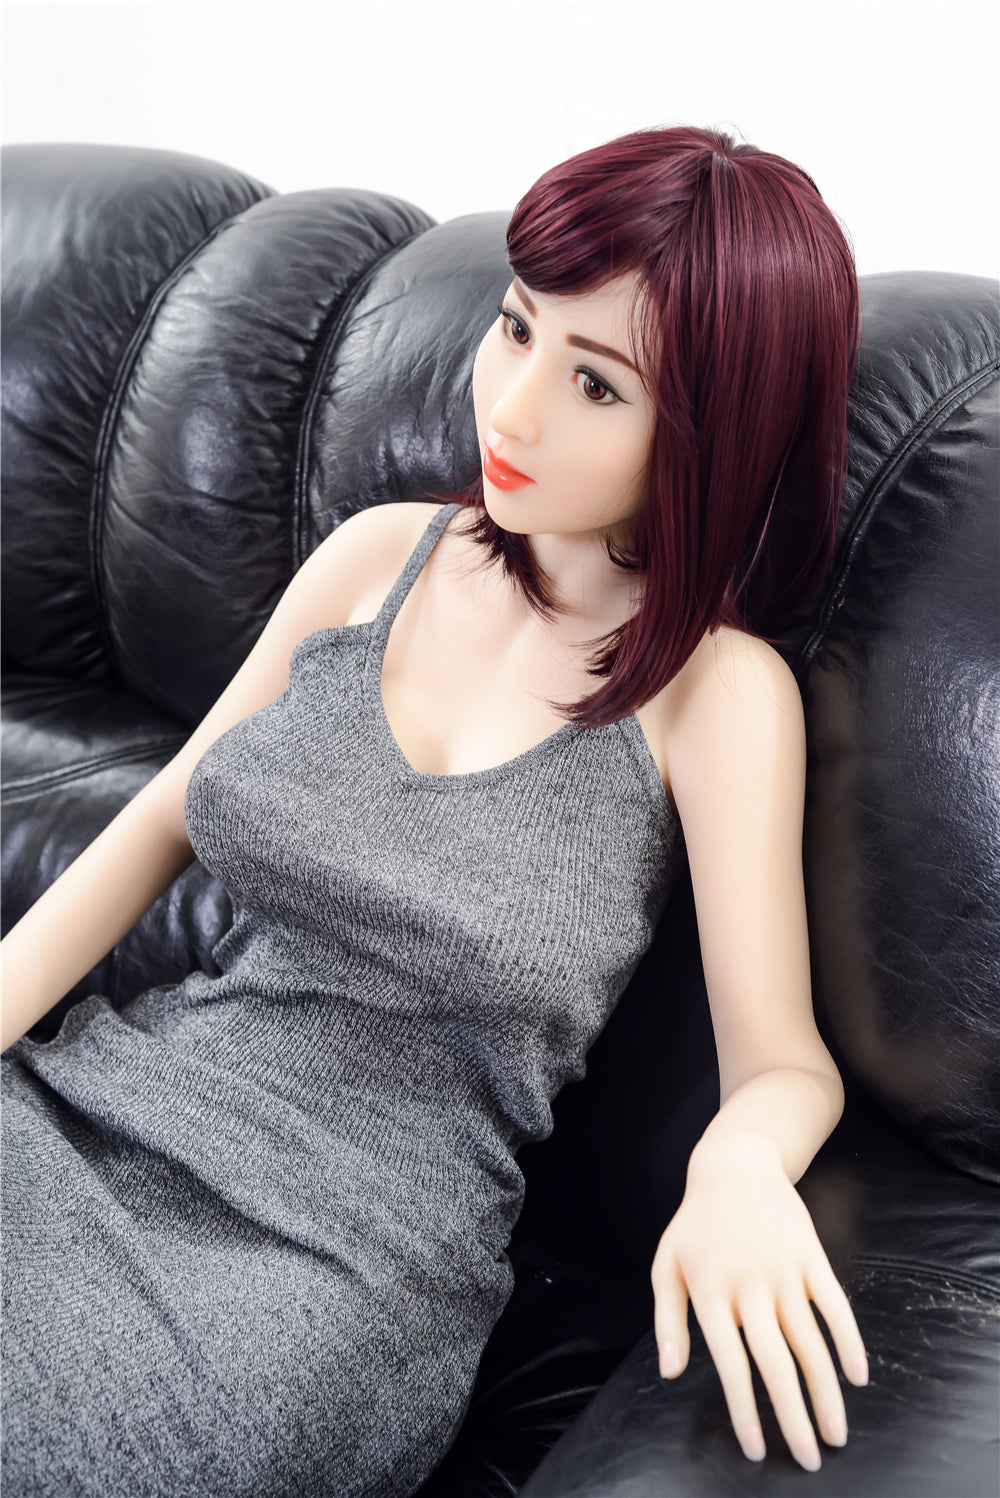 Irontech Doll 160 cm D TPE - Talia | Buy Sex Dolls at DOLLS ACTUALLY